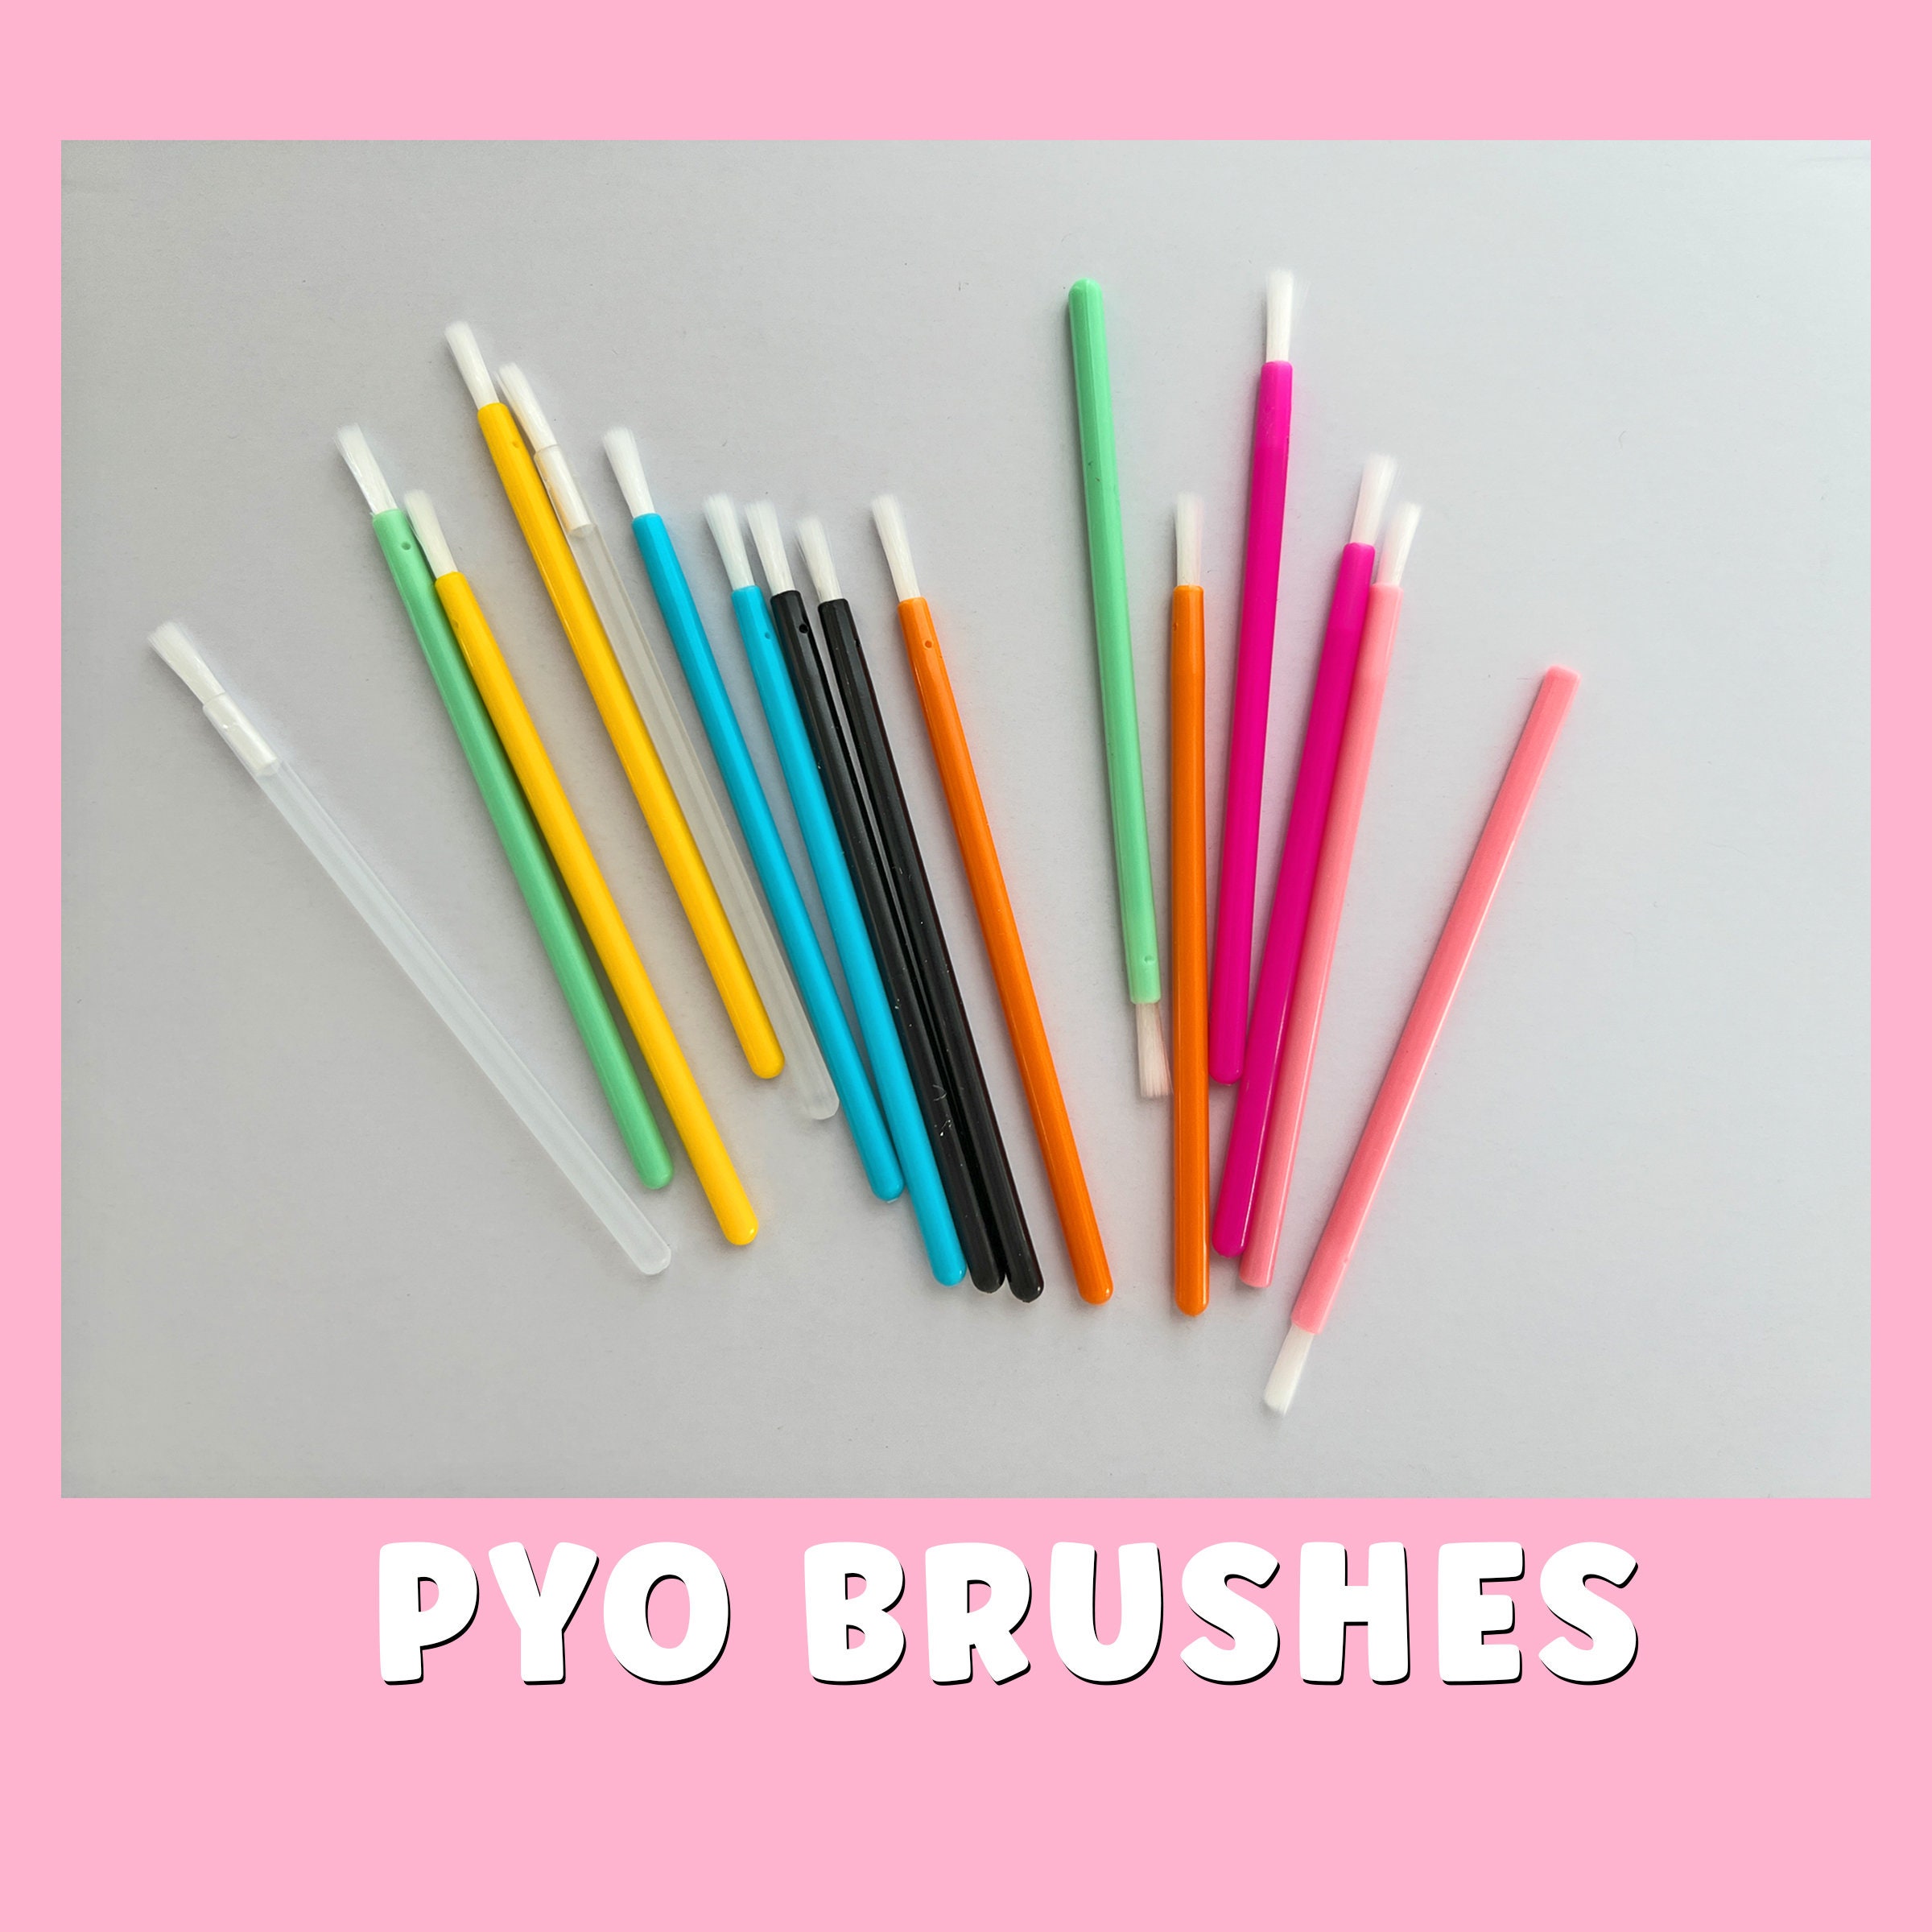 Food Safe Paint Brushes for PYO Cookies - Pack of 60